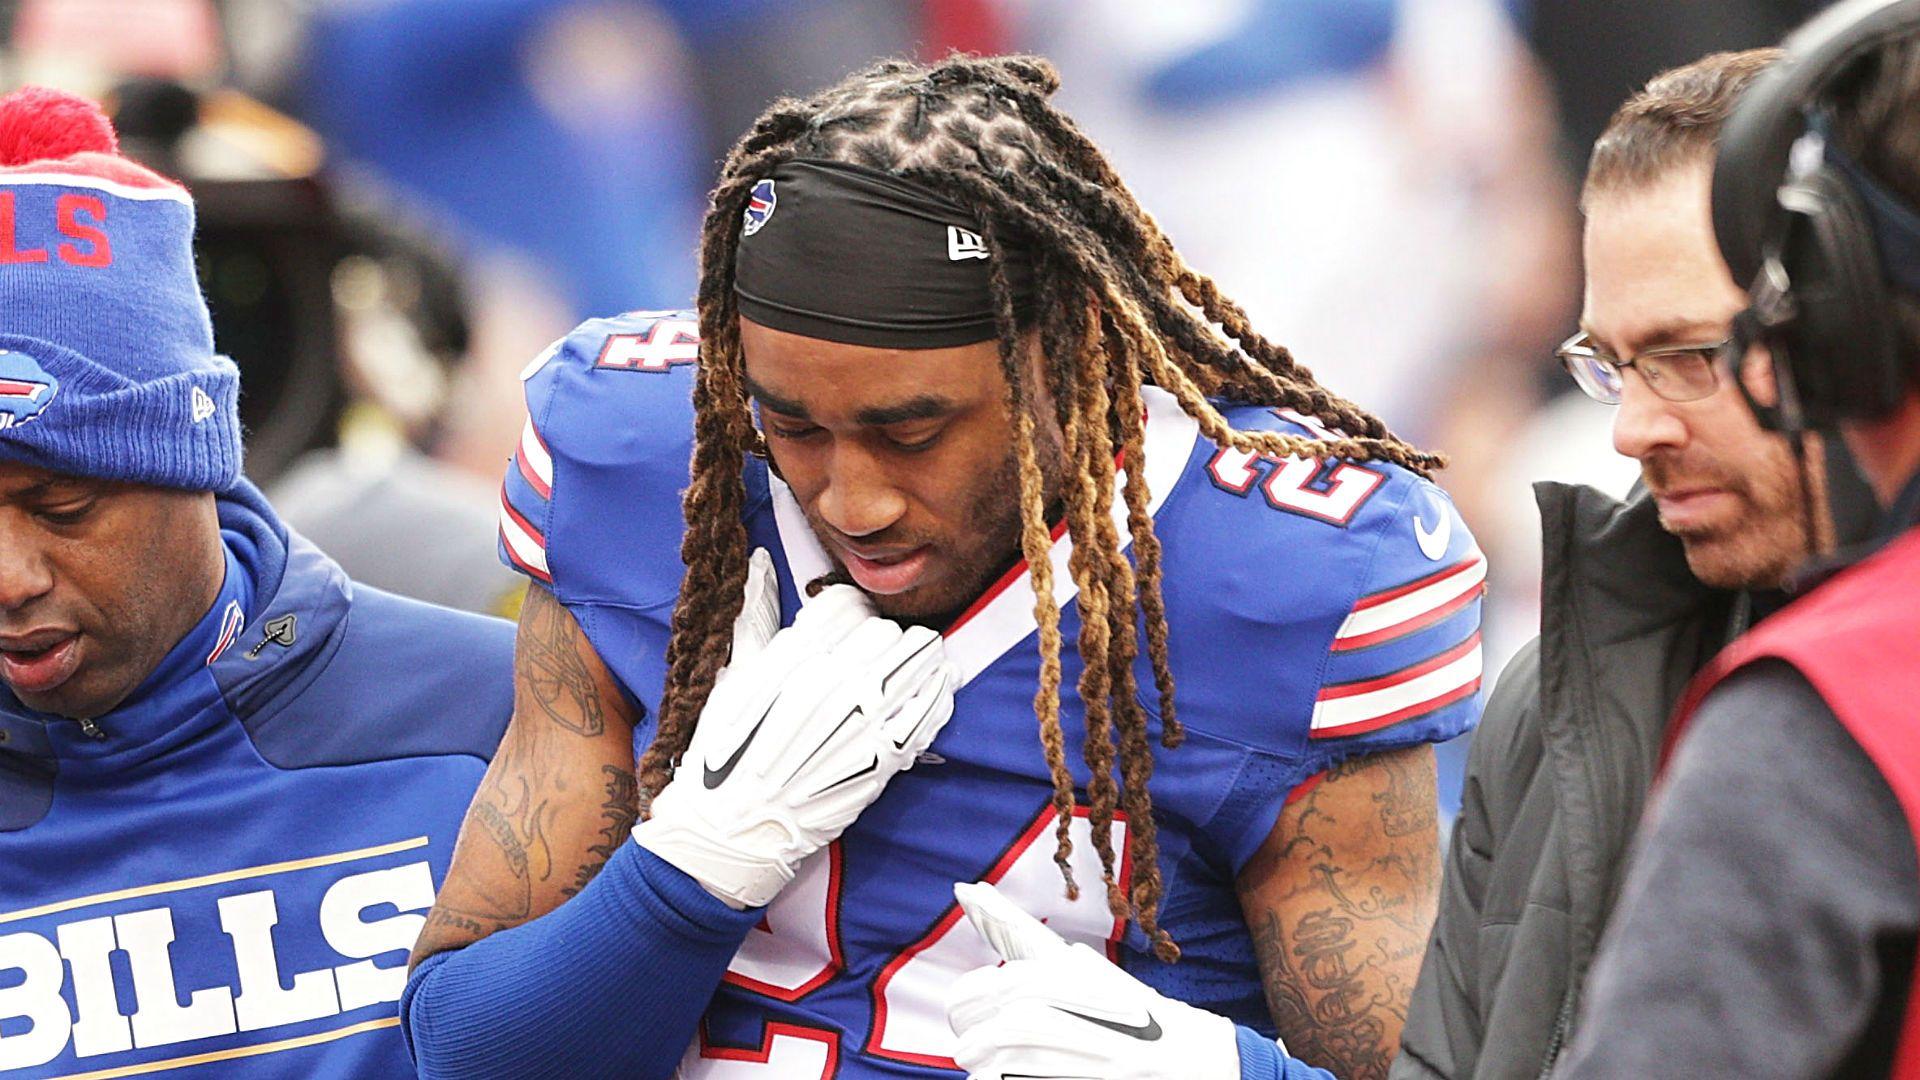 Stephon Gilmore's season ends with shoulder surgery, IR. NFL